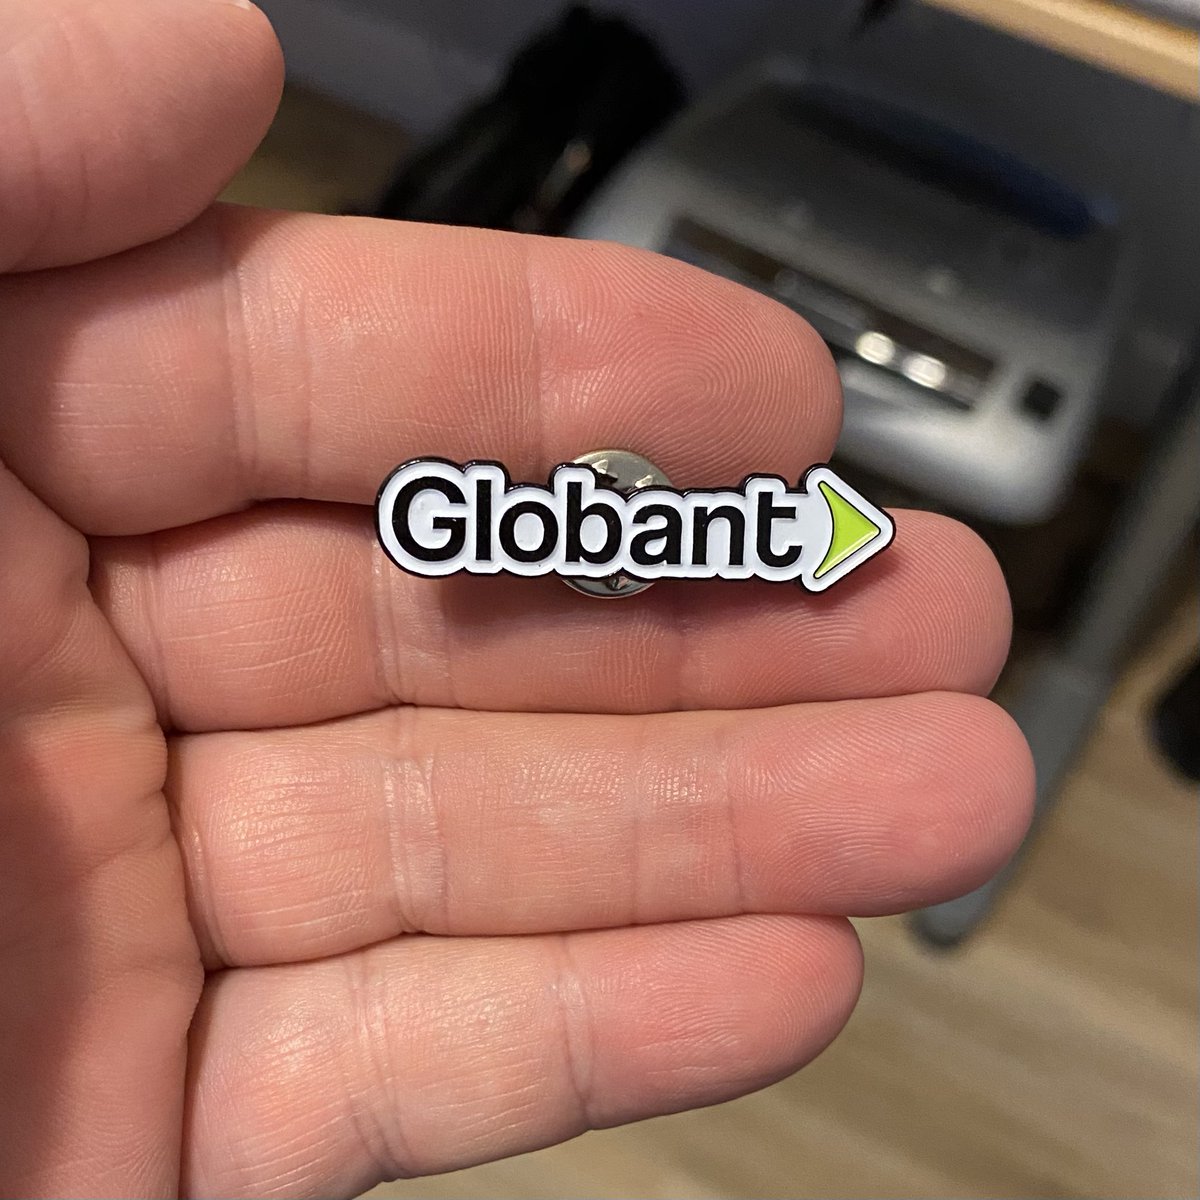 Live Colorfully! Stand out with custom enamel pins made to your own unique design that will turn heads and show off your personality. We do tiny too!  #CustomEnamelPins #InStyle #ExpressYourself #Dreamforce #Globant #ThrottleExhibits #HitTheGas